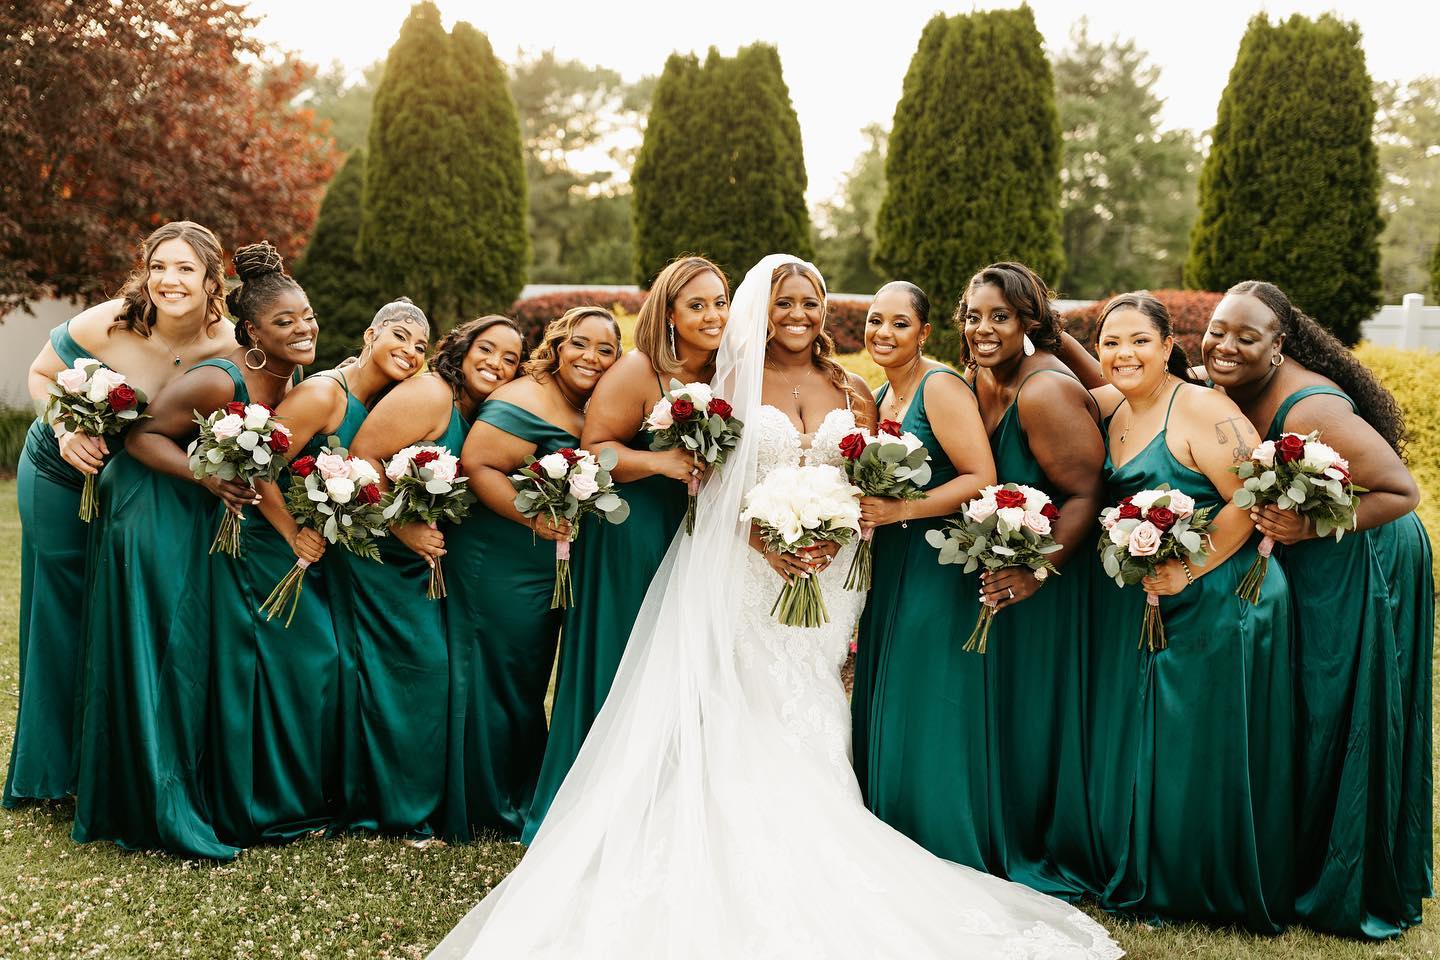 Bride and bridesmaids smiling and holding hands